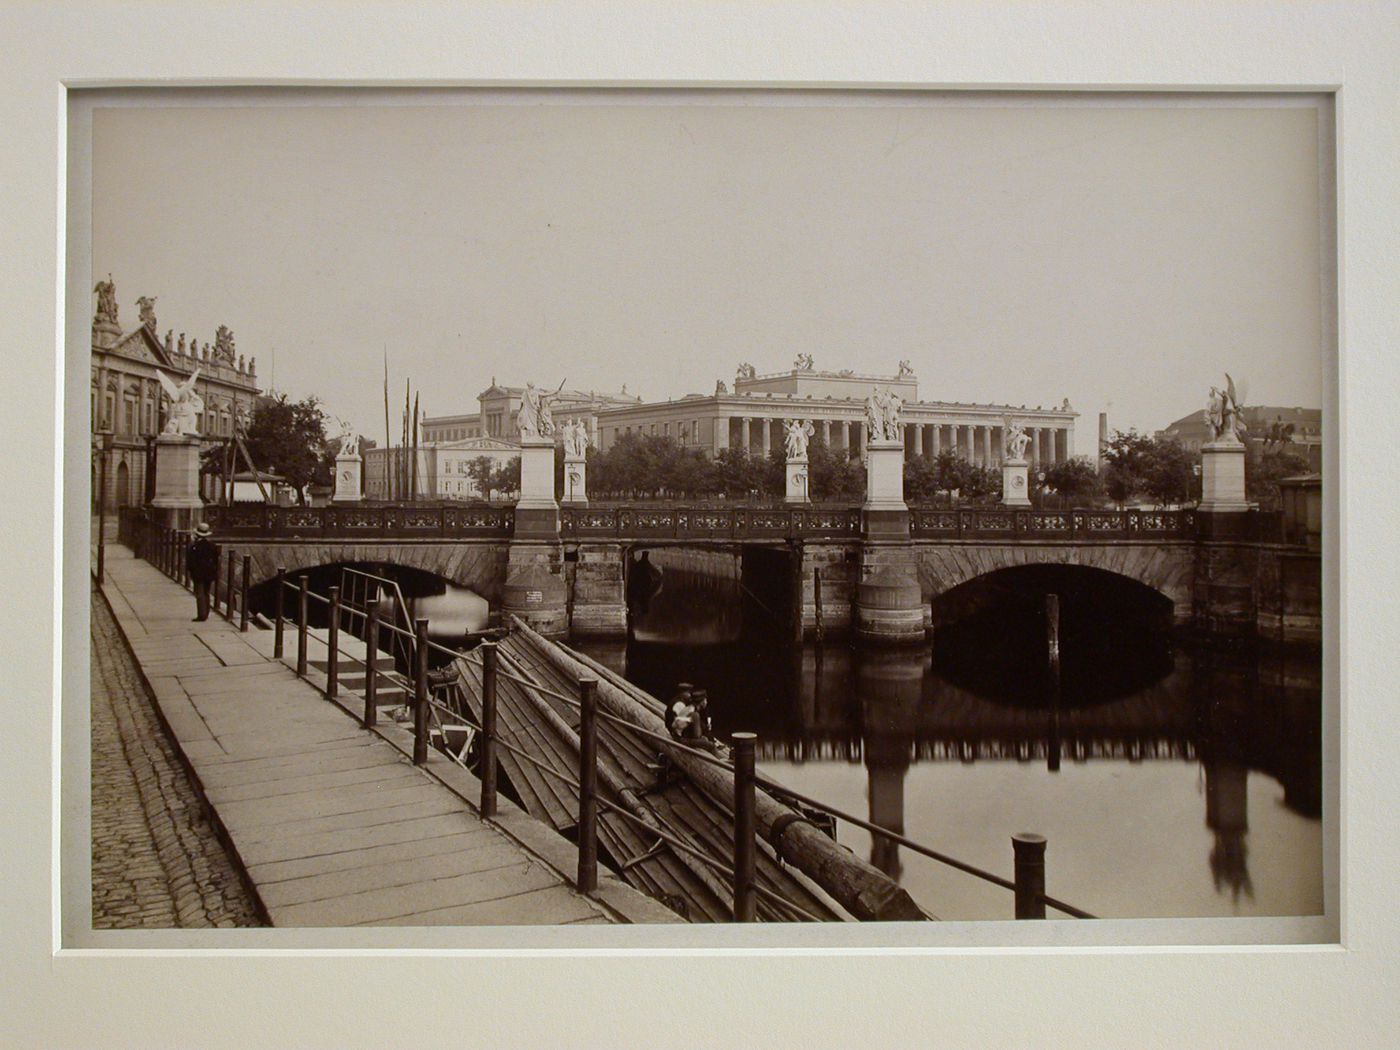 View of Altes Museum and Schlossbrucke in foreground, Berlin, Germany